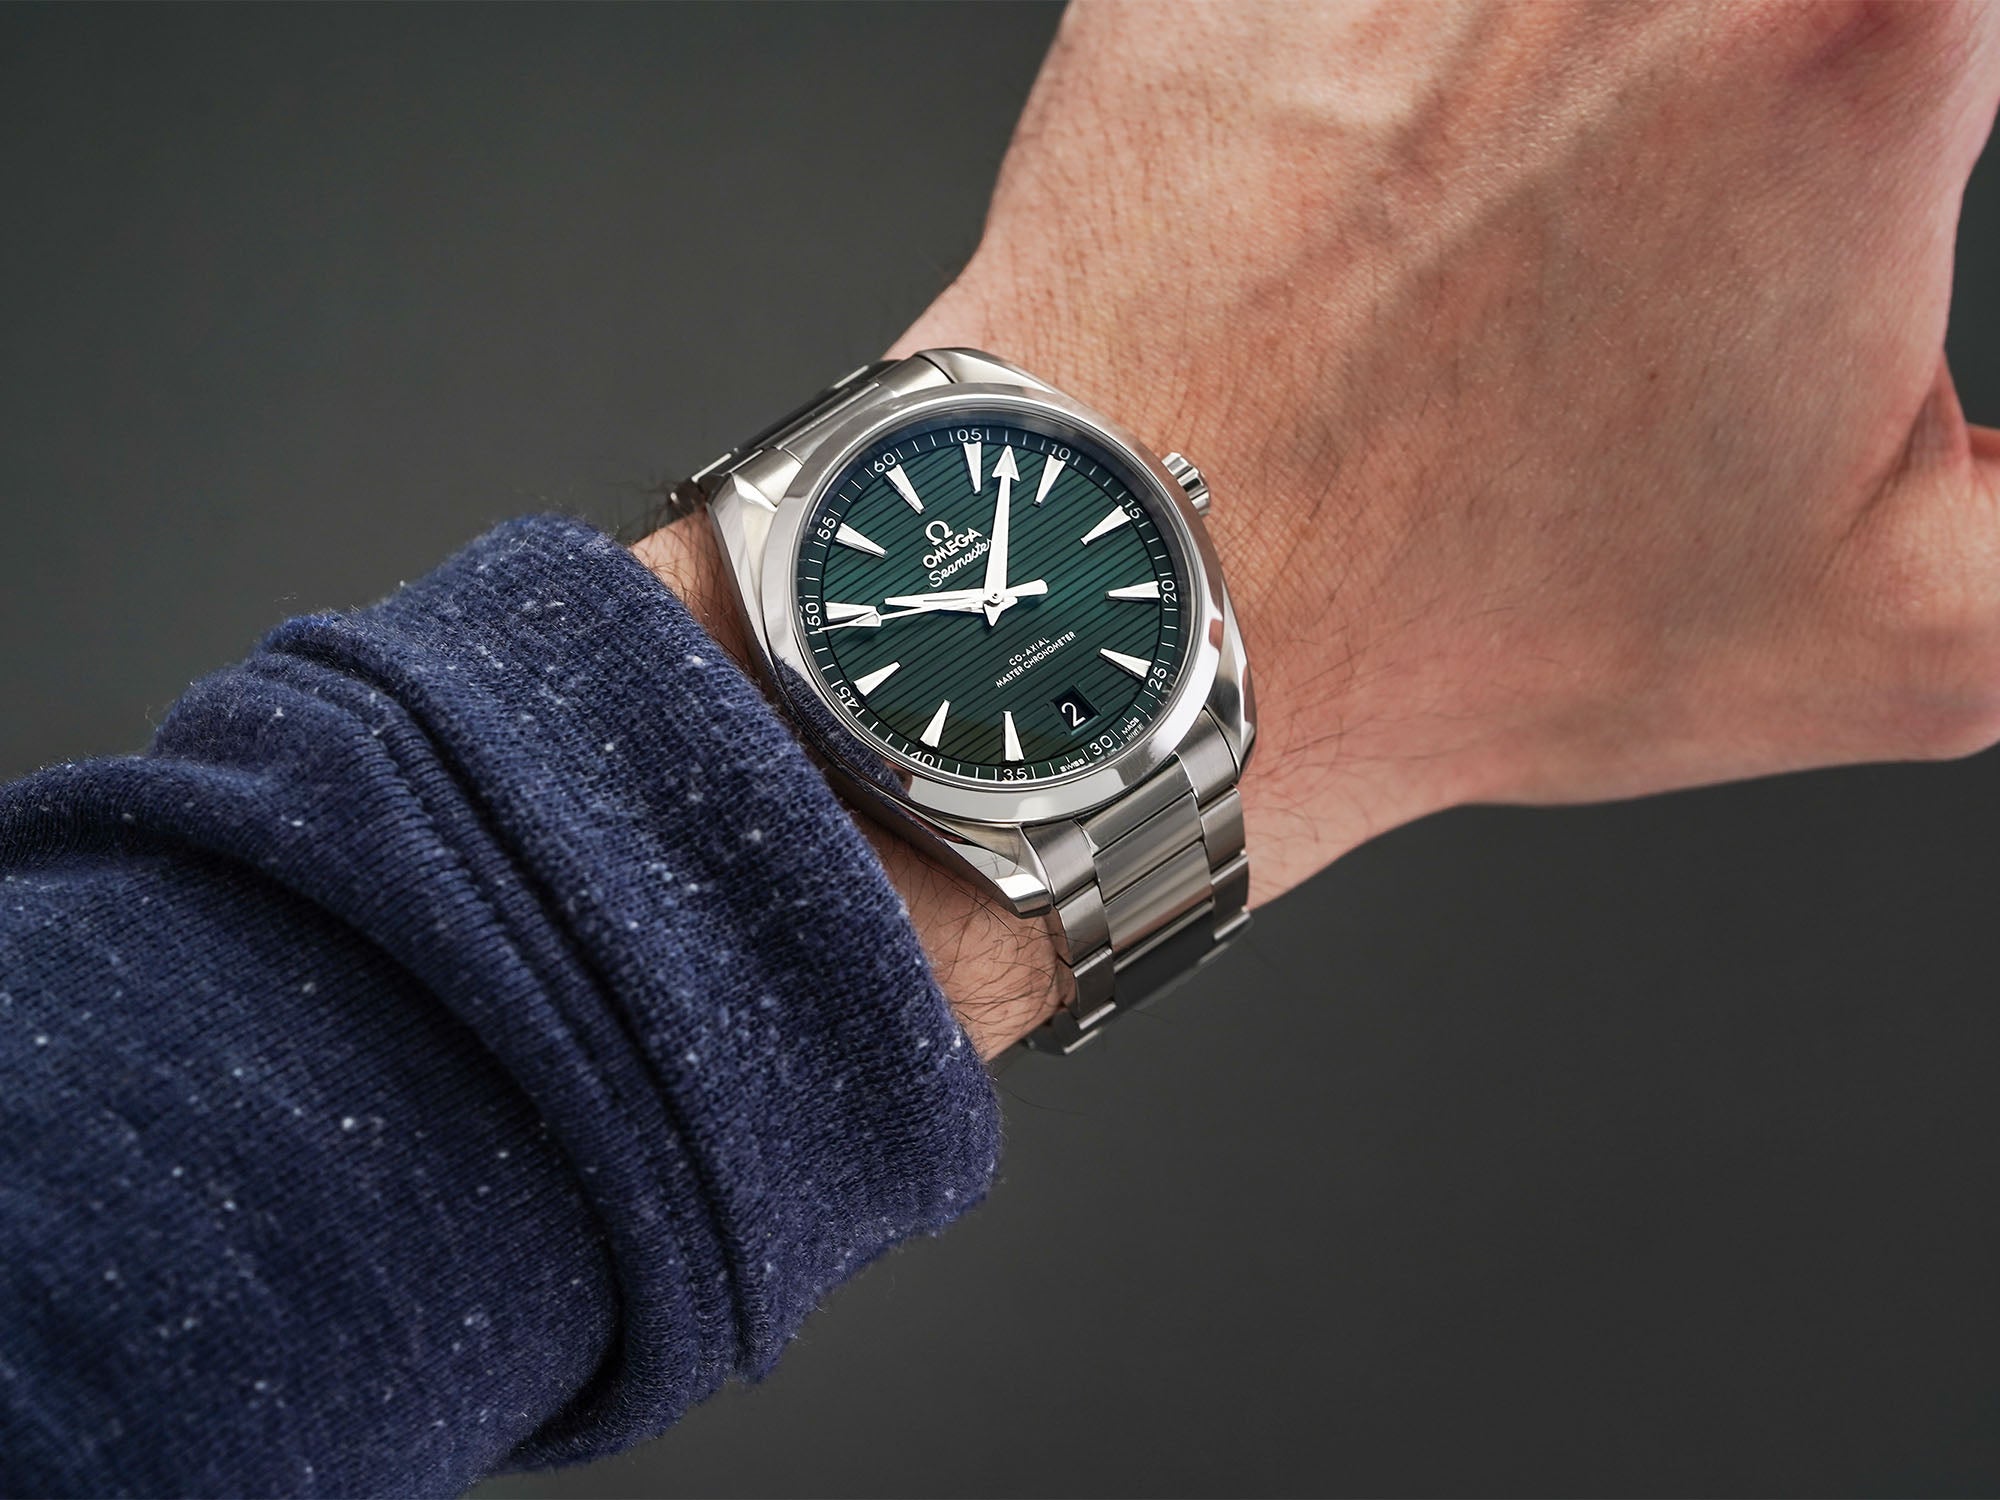 What to Know Before Buying the Omega Aqua Terra | Teddy Baldassarre